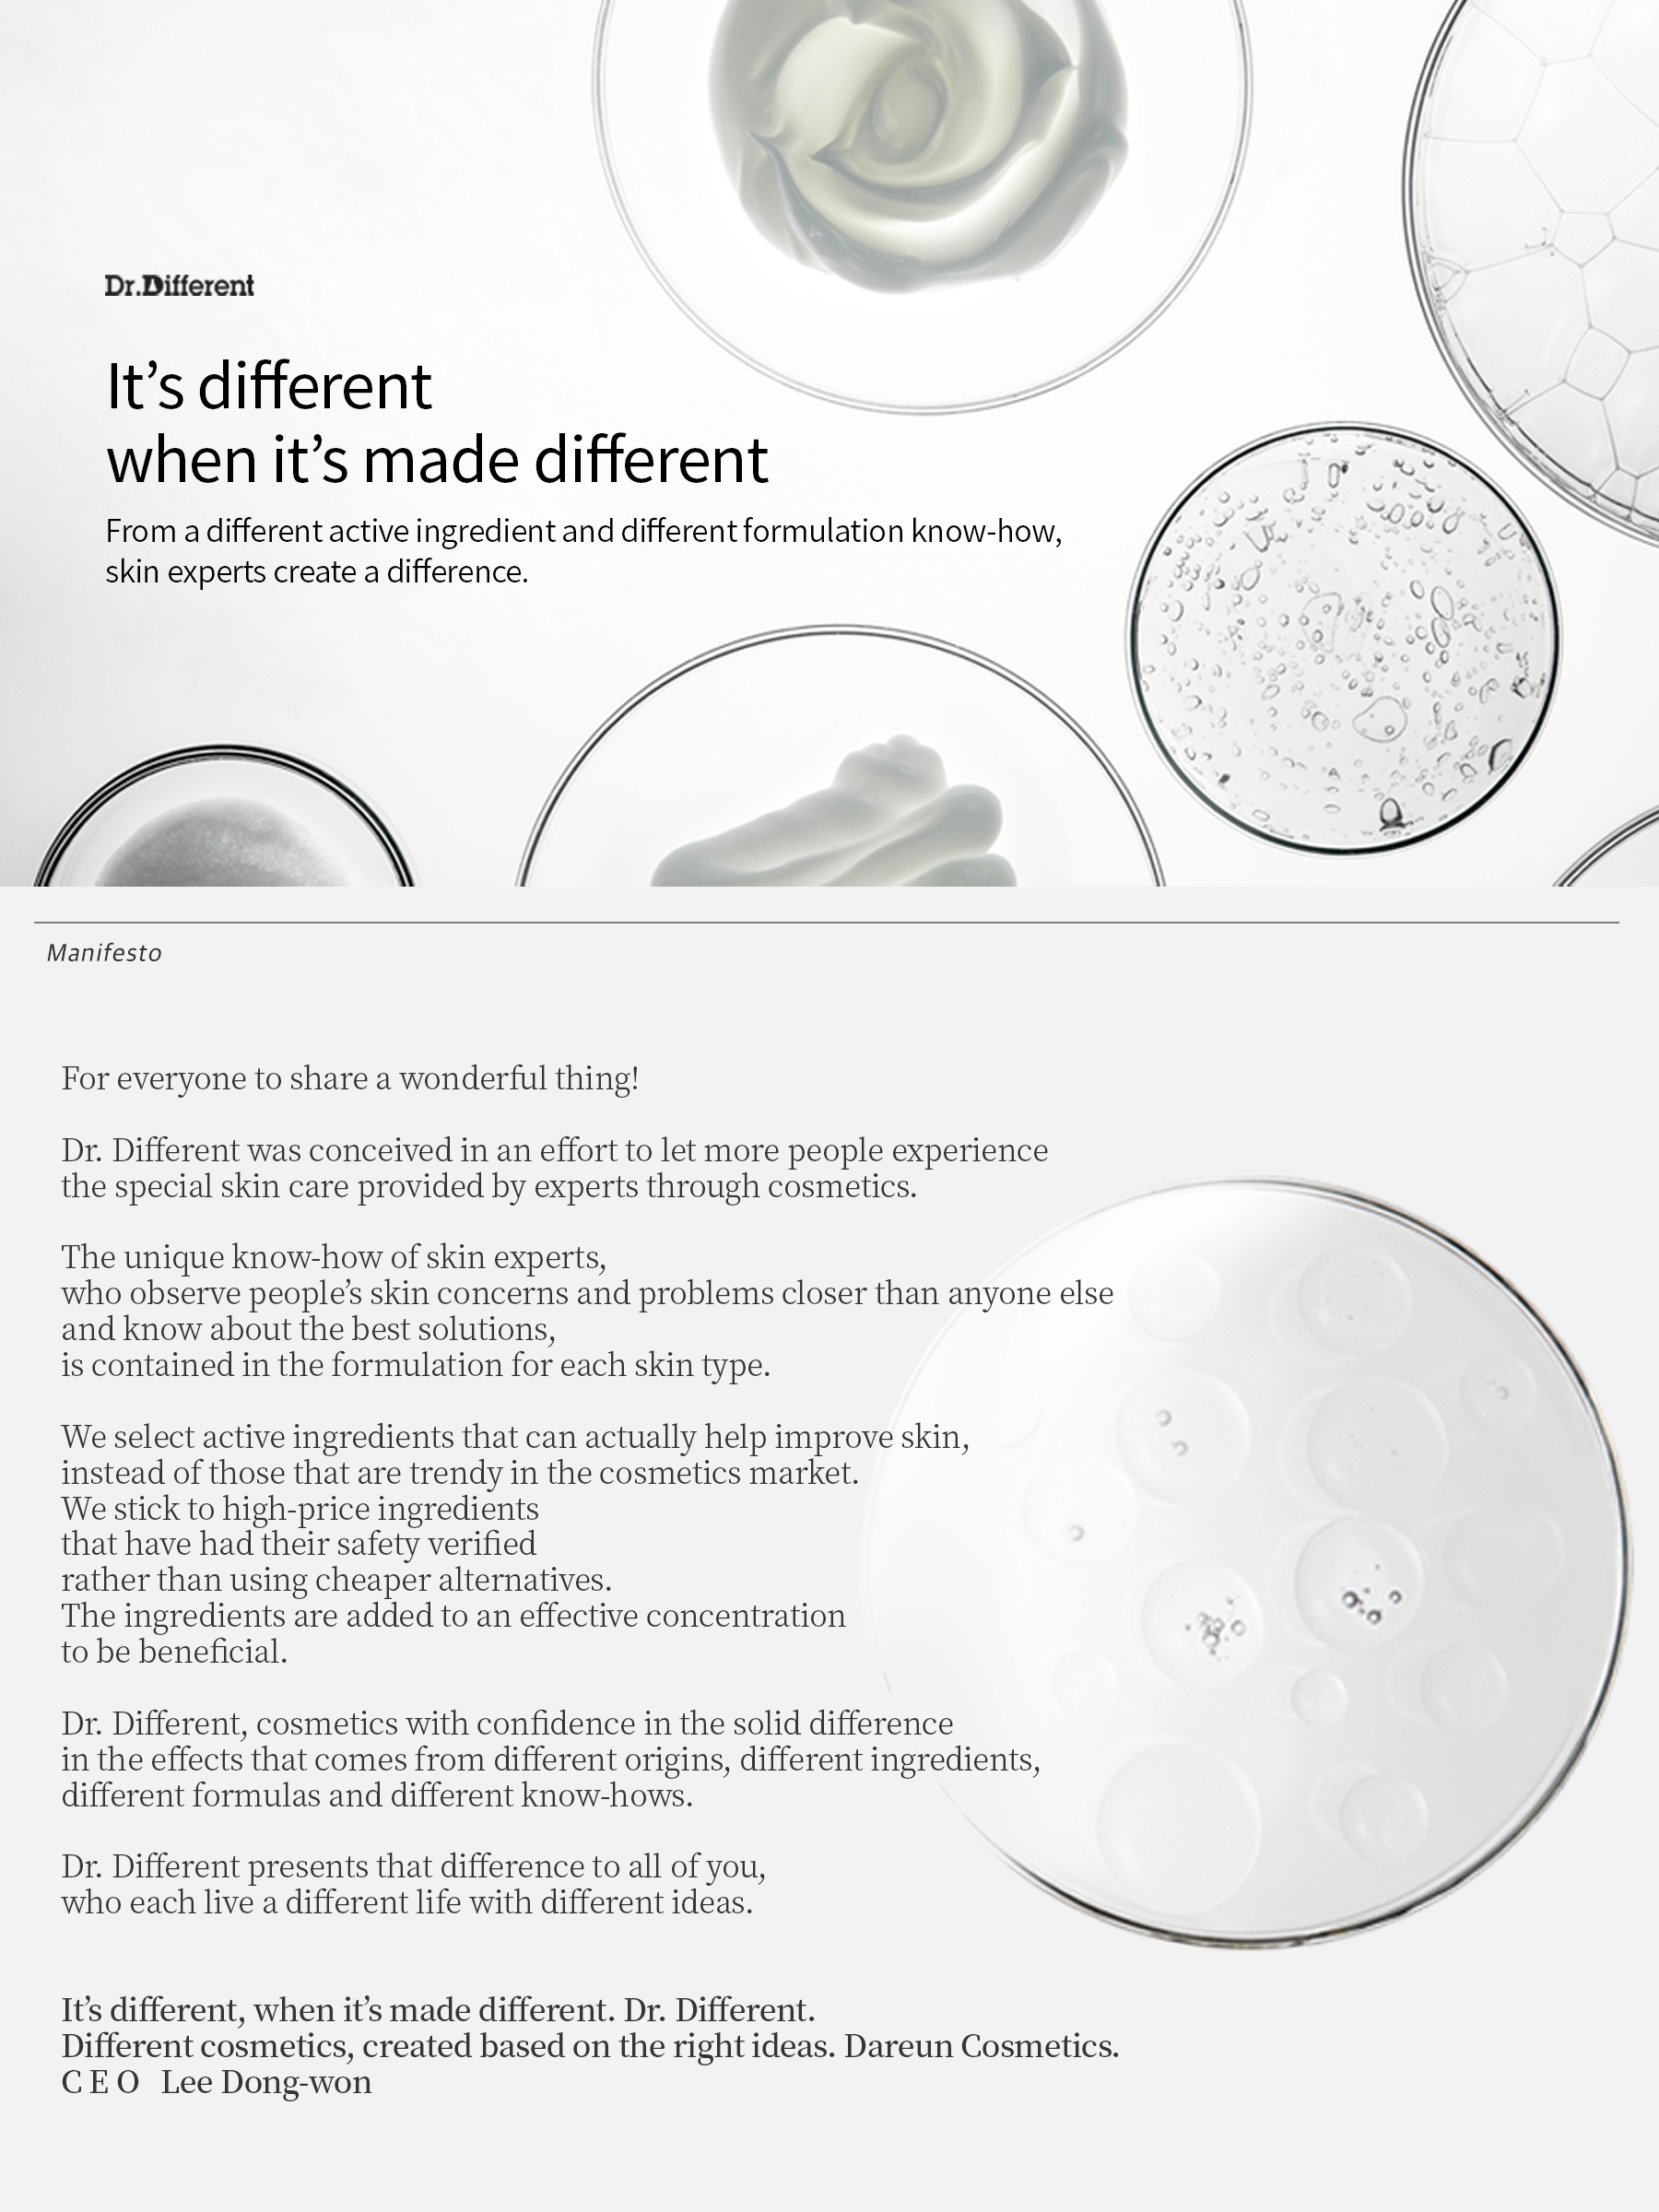  Dr.Different: ALL PRODUCTS